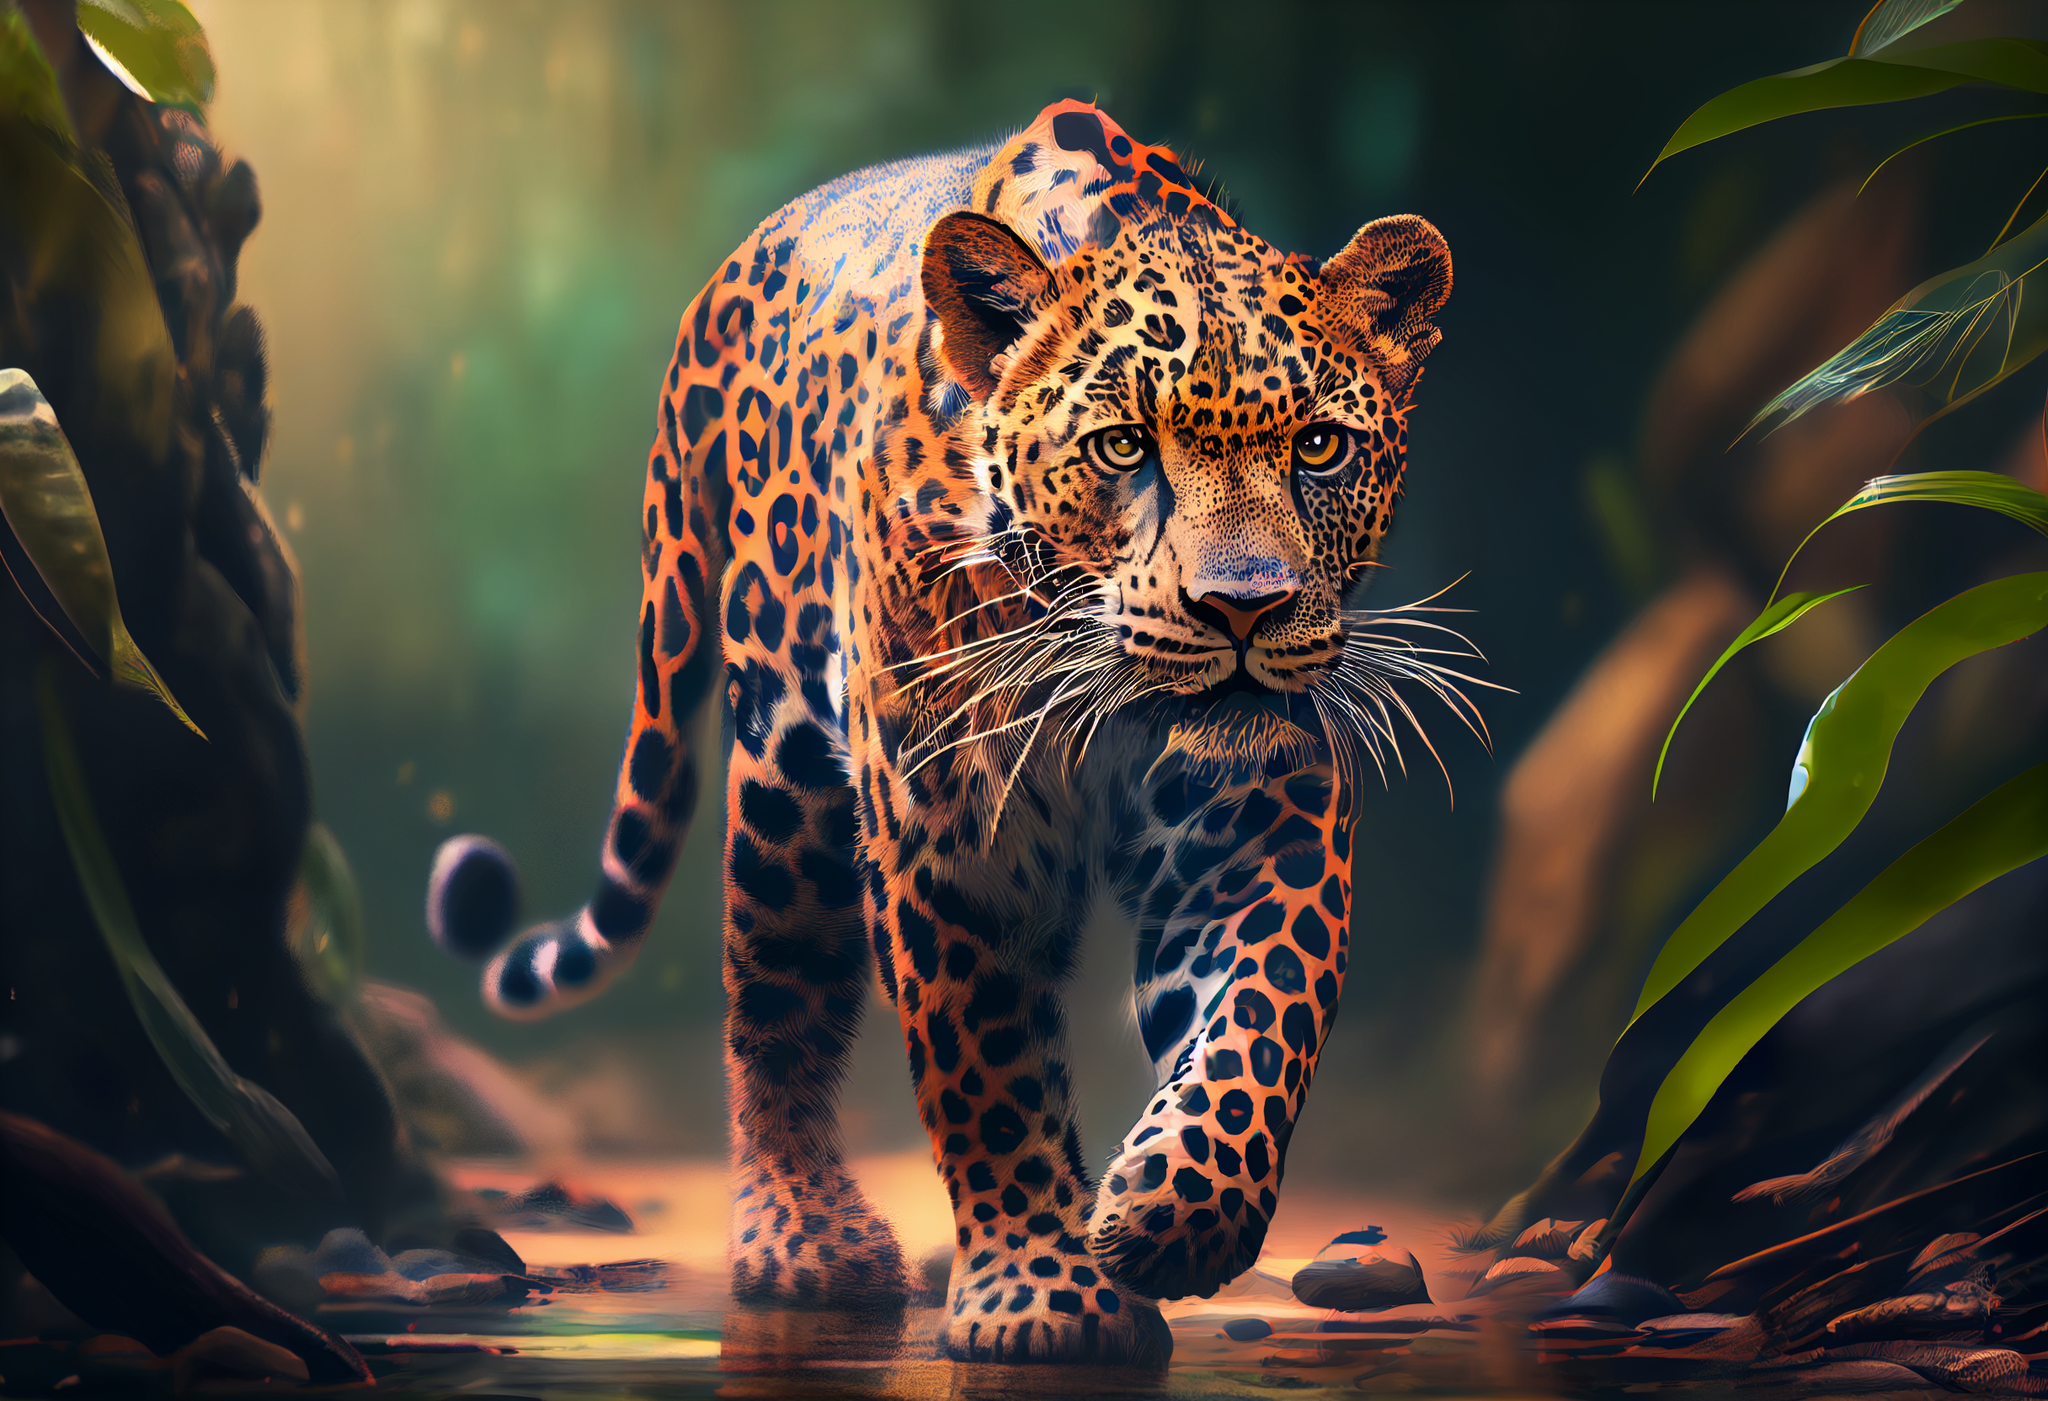 Jungle Royalty: A Stunning Airbrushed Print of a Majestic Leopard in its Natural Habitat